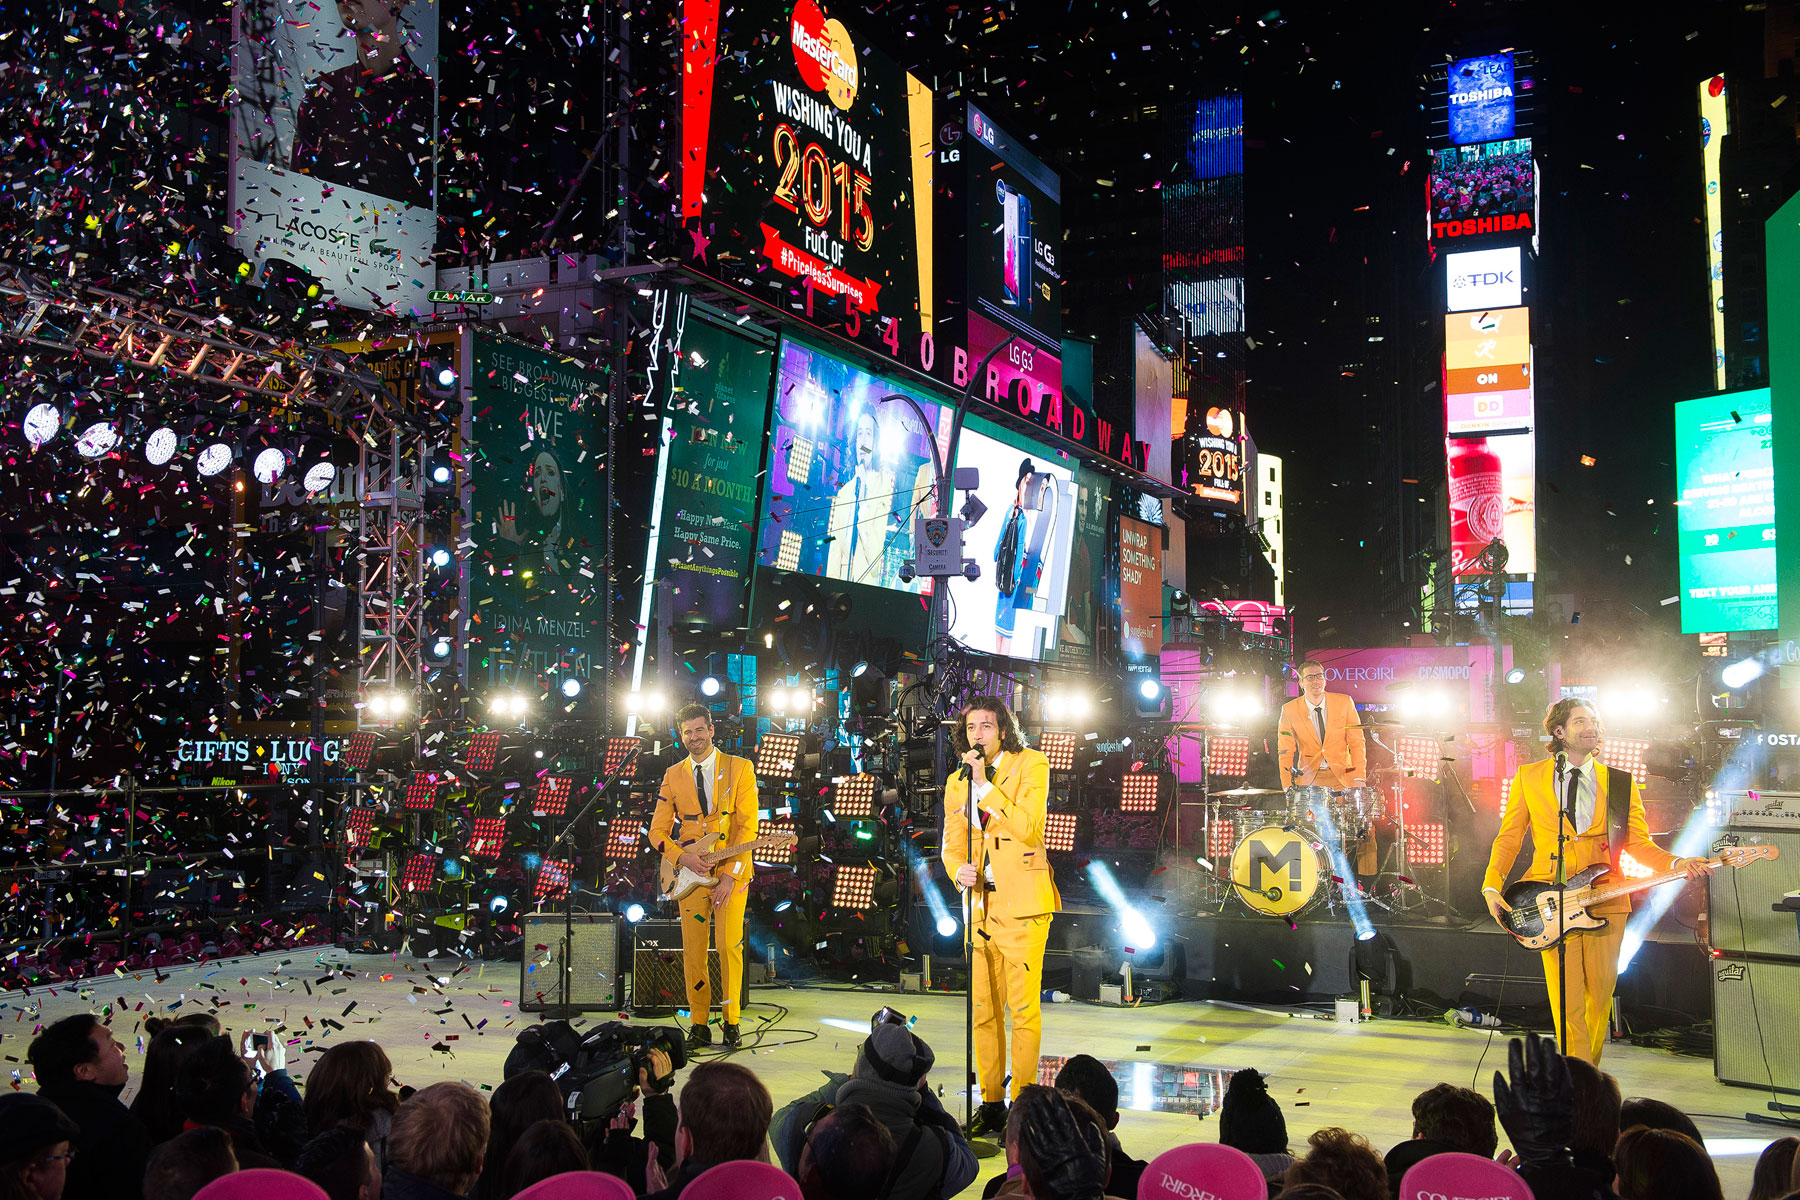 

The band Magic! perform in Times Square during New Year's Eve celebrations on Wednesday, Dec. 31, 2014 in New York. (Photo by Charles Sykes/Invision/AP)